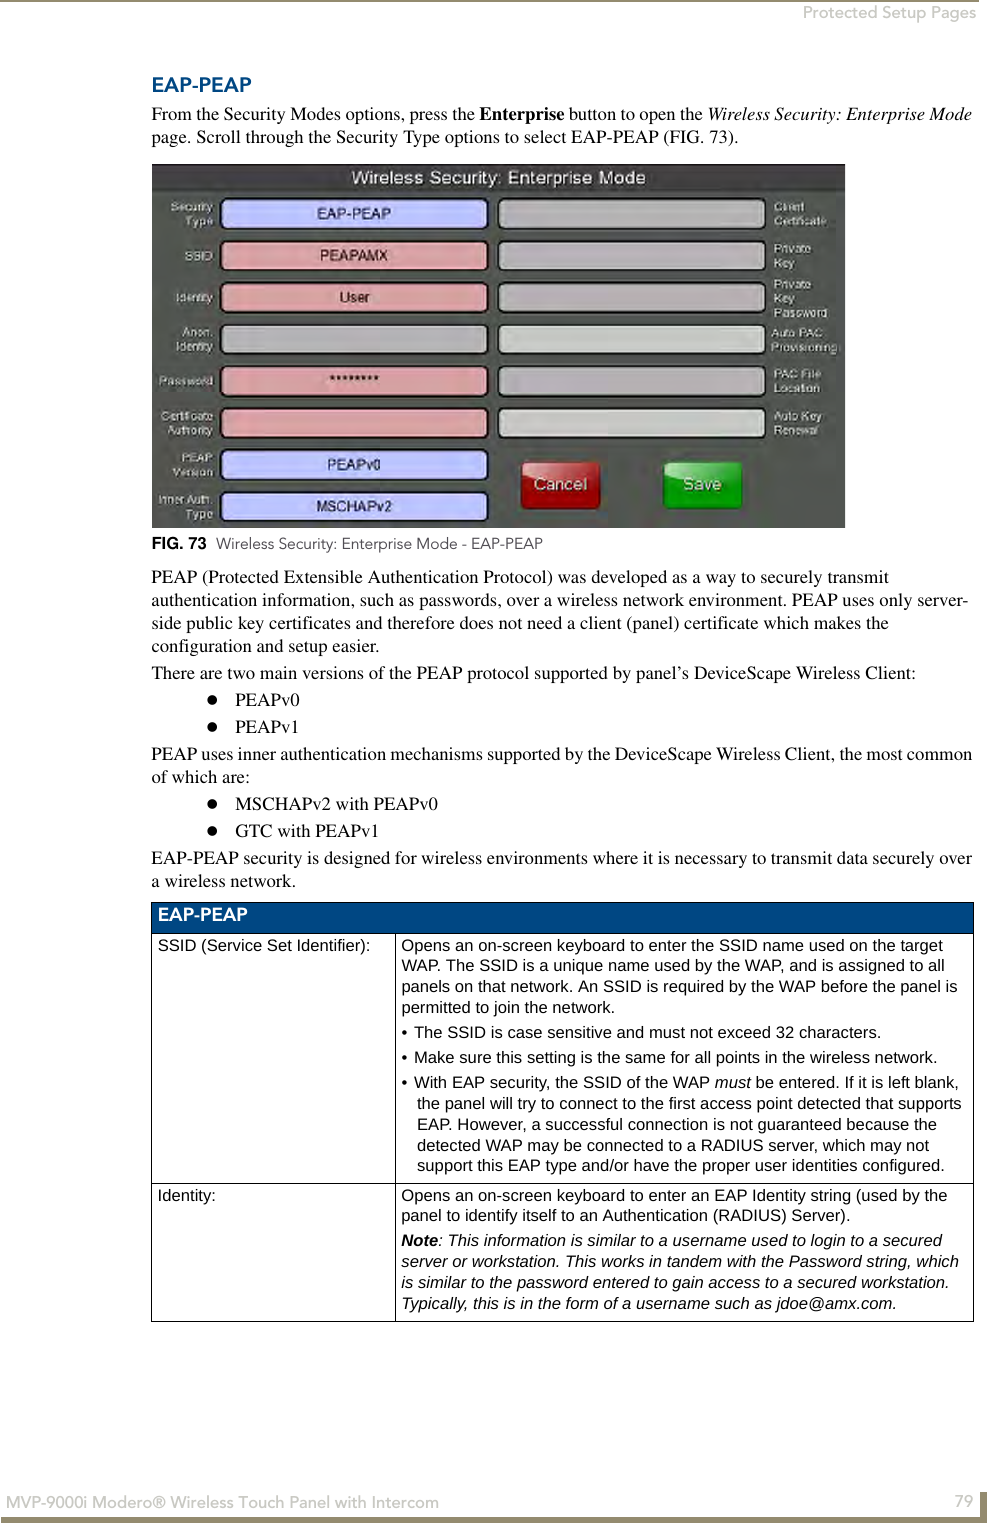 Protected Setup Pages79MVP-9000i Modero® Wireless Touch Panel with IntercomEAP-PEAPFrom the Security Modes options, press the Enterprise button to open the Wireless Security: Enterprise Mode page. Scroll through the Security Type options to select EAP-PEAP (FIG. 73).        PEAP (Protected Extensible Authentication Protocol) was developed as a way to securely transmit authentication information, such as passwords, over a wireless network environment. PEAP uses only server-side public key certificates and therefore does not need a client (panel) certificate which makes the configuration and setup easier. There are two main versions of the PEAP protocol supported by panel’s DeviceScape Wireless Client: PEAPv0PEAPv1PEAP uses inner authentication mechanisms supported by the DeviceScape Wireless Client, the most common of which are: MSCHAPv2 with PEAPv0GTC with PEAPv1EAP-PEAP security is designed for wireless environments where it is necessary to transmit data securely over a wireless network. FIG. 73  Wireless Security: Enterprise Mode - EAP-PEAPEAP-PEAPSSID (Service Set Identifier): Opens an on-screen keyboard to enter the SSID name used on the target WAP. The SSID is a unique name used by the WAP, and is assigned to all panels on that network. An SSID is required by the WAP before the panel is permitted to join the network. • The SSID is case sensitive and must not exceed 32 characters. • Make sure this setting is the same for all points in the wireless network.• With EAP security, the SSID of the WAP must be entered. If it is left blank, the panel will try to connect to the first access point detected that supports EAP. However, a successful connection is not guaranteed because the detected WAP may be connected to a RADIUS server, which may not support this EAP type and/or have the proper user identities configured.Identity: Opens an on-screen keyboard to enter an EAP Identity string (used by the panel to identify itself to an Authentication (RADIUS) Server). Note: This information is similar to a username used to login to a secured server or workstation. This works in tandem with the Password string, which is similar to the password entered to gain access to a secured workstation. Typically, this is in the form of a username such as jdoe@amx.com.